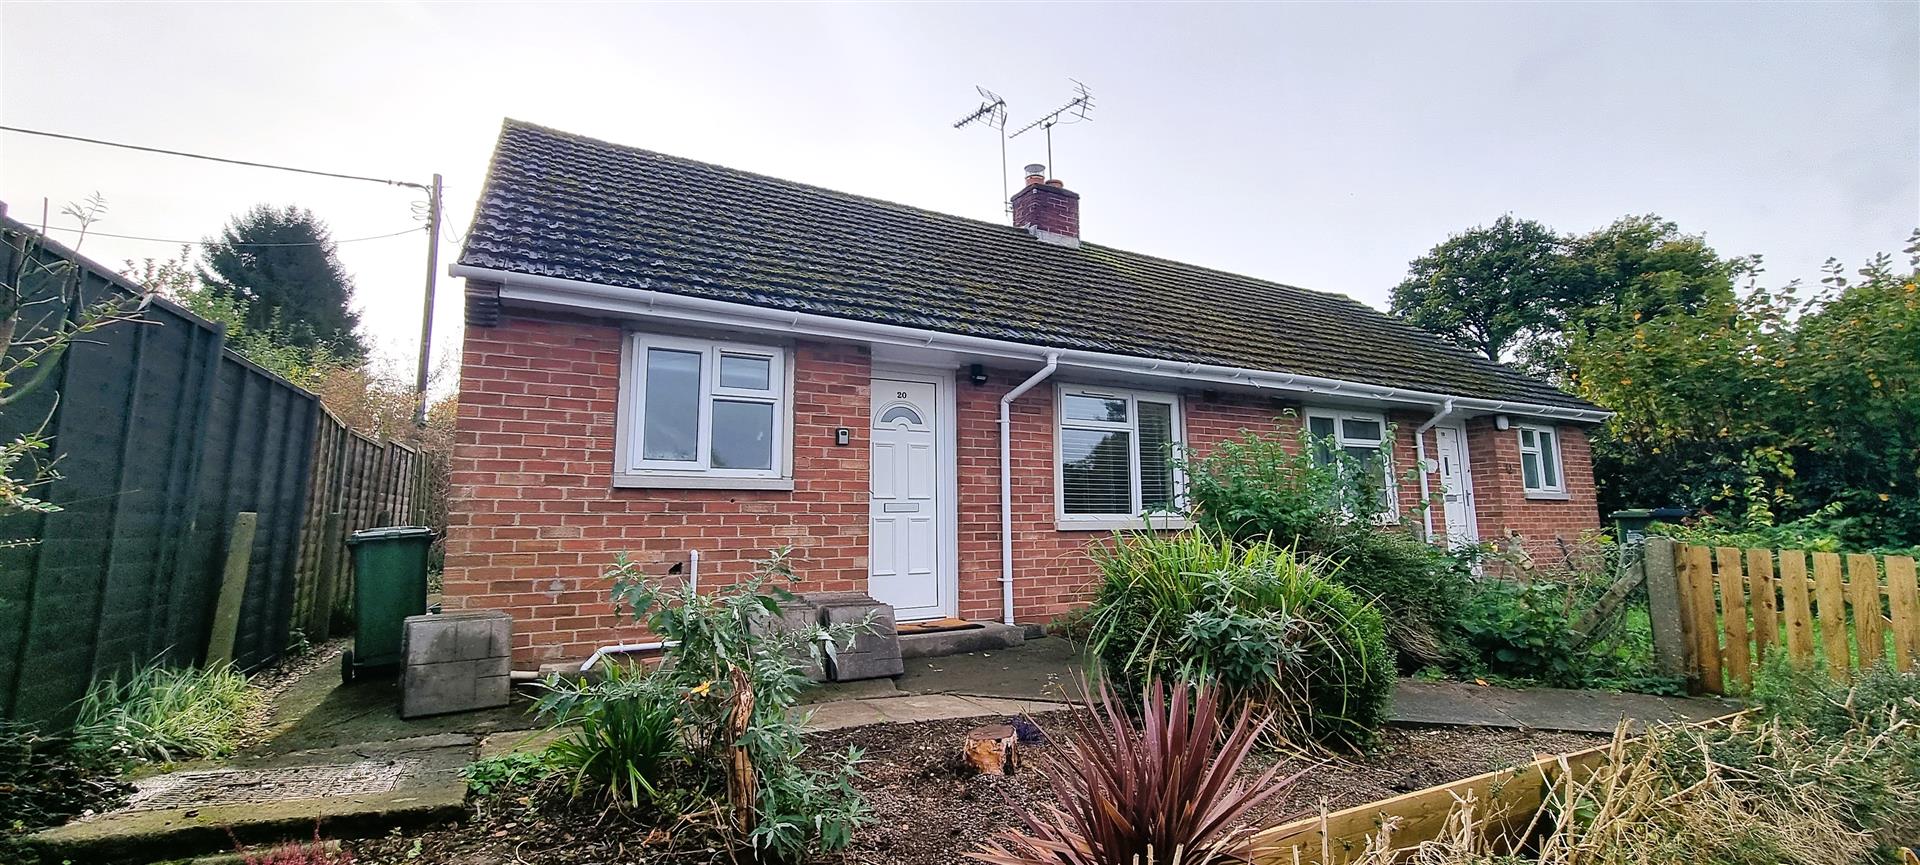 2 bed semi-detached bungalow to rent in Westland View, Leominster, Herefordshire - Property Image 1